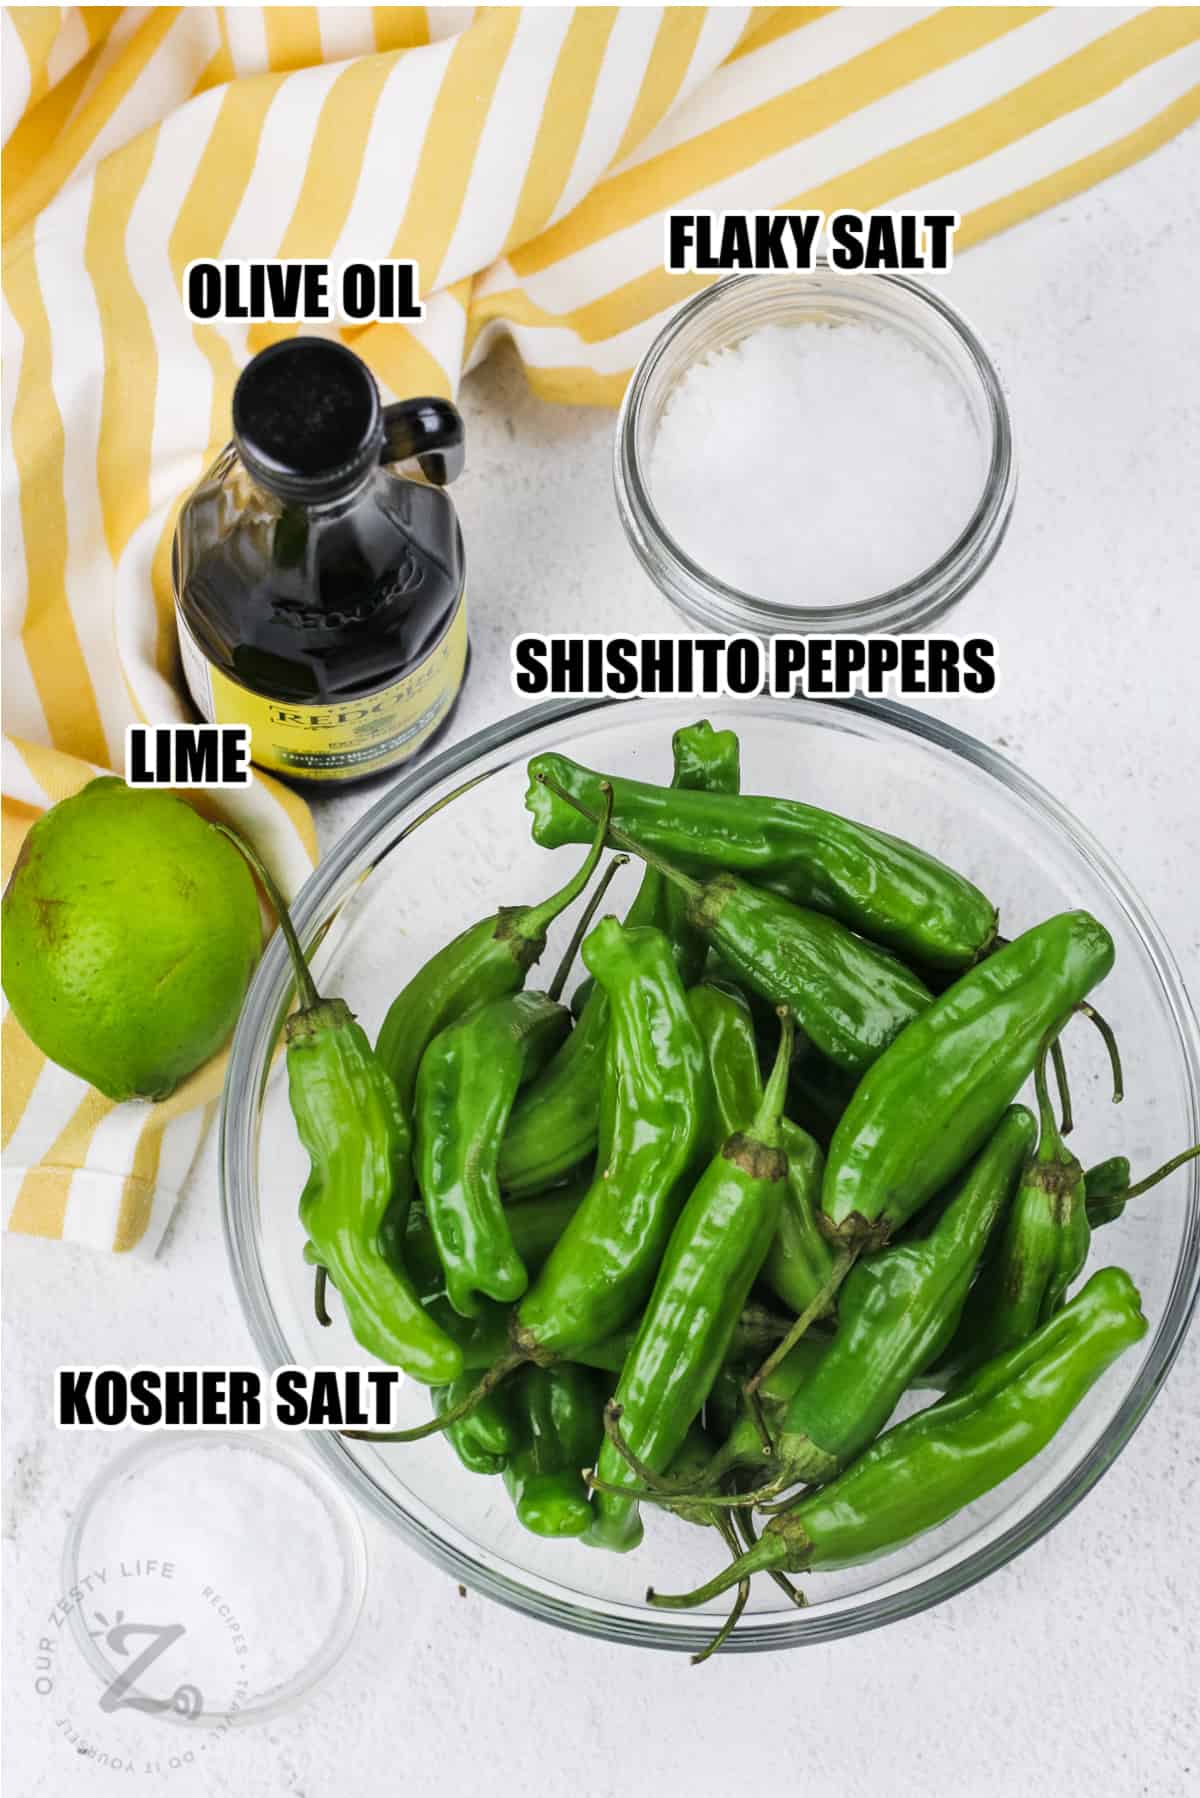 ingredients for blistered shishito peppers including shishito peppers, flaky salt, olive oil, lime, and kosher salt